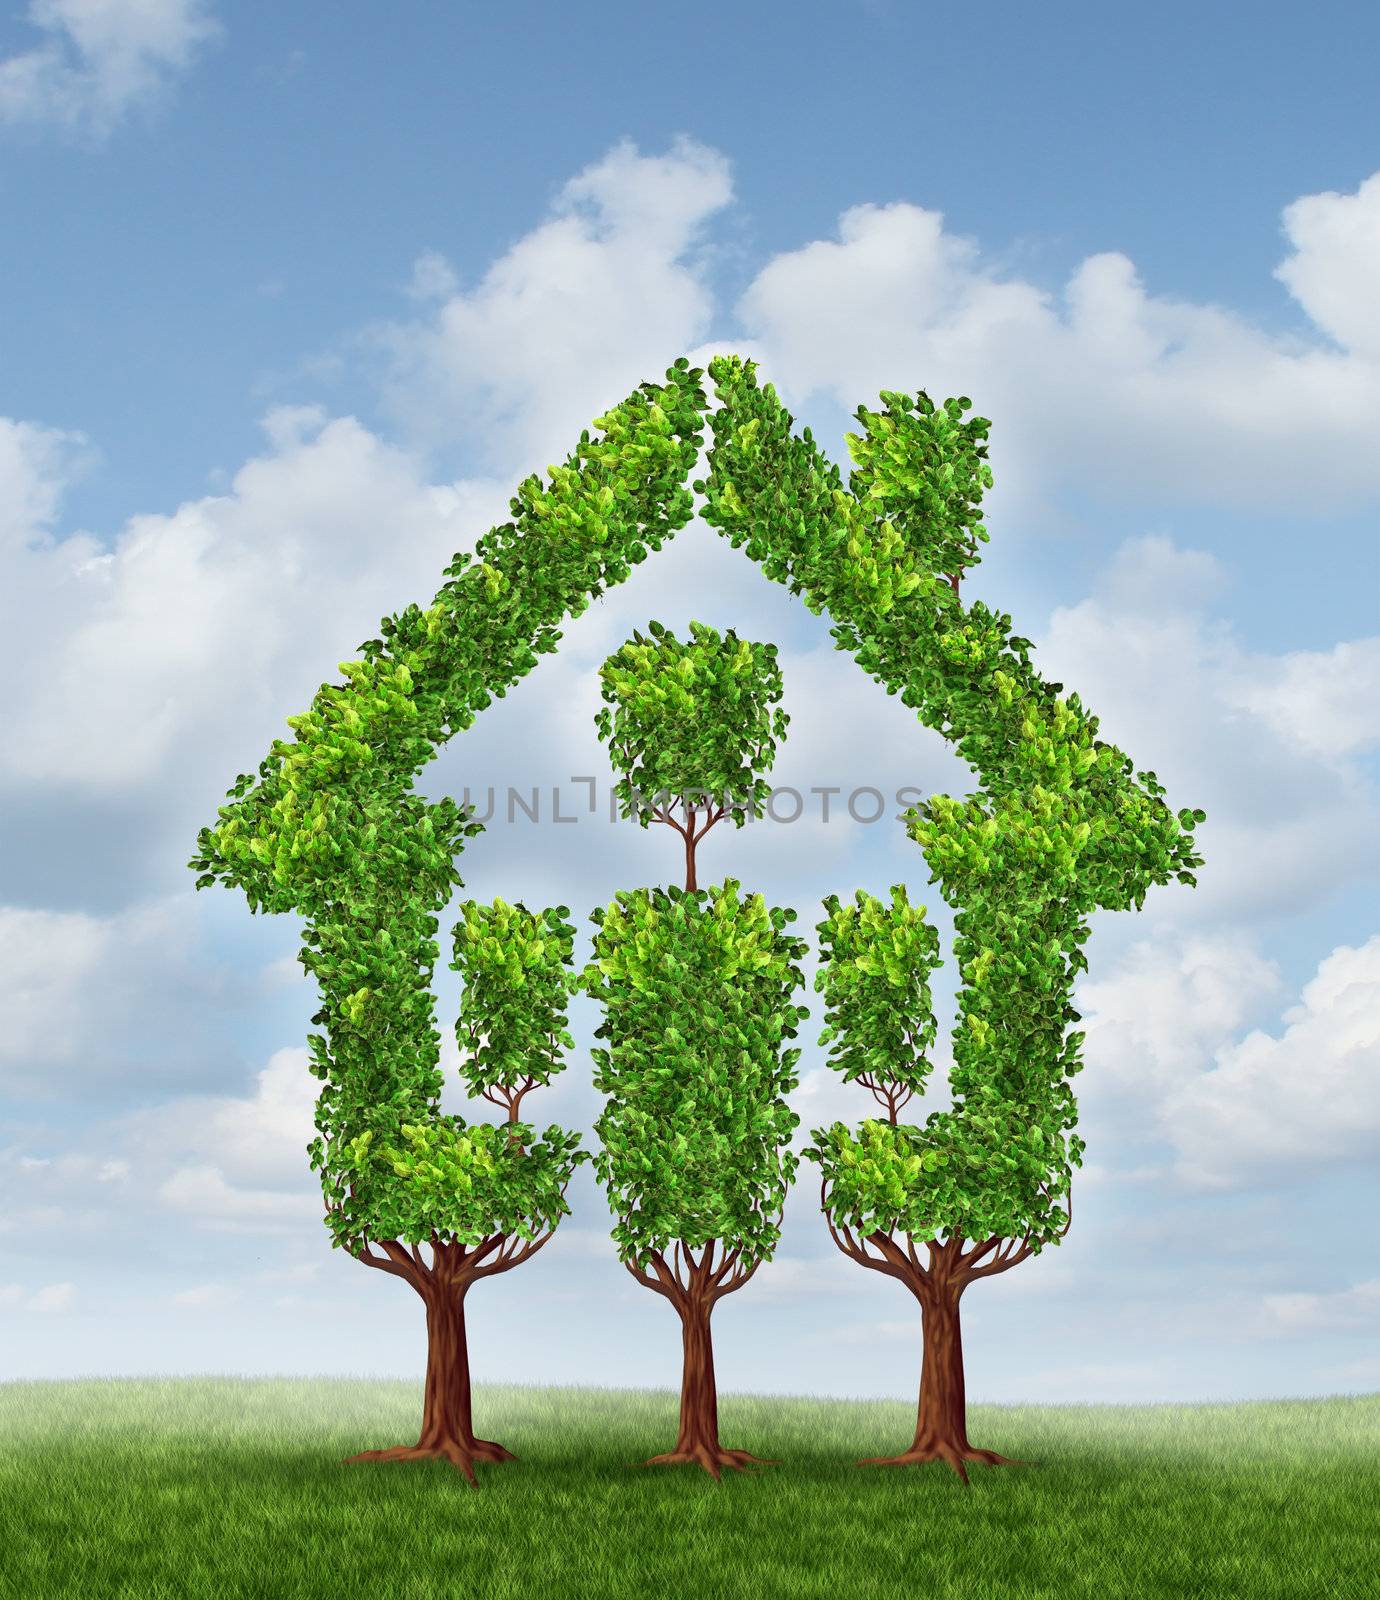 House Tree as a symbol of real estate planning and family home investing for property wealth strategy as a group of three trees lanscaped to come together to form the shape of a residential structure on a sky background.